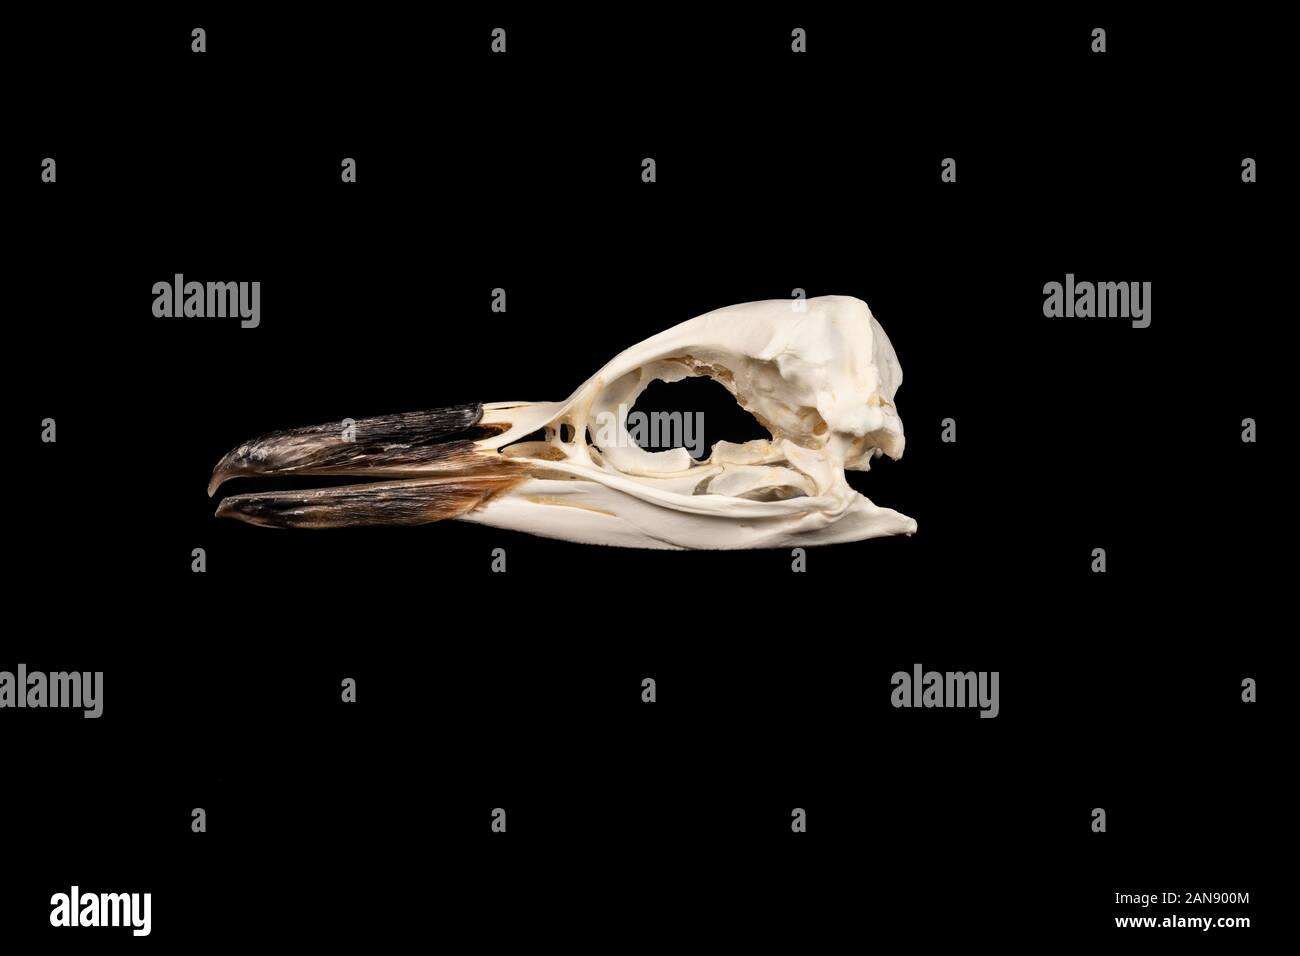 skull of a magellanic penguin - spheniscus magellanicus shown on the left side on a black background Stock Photo